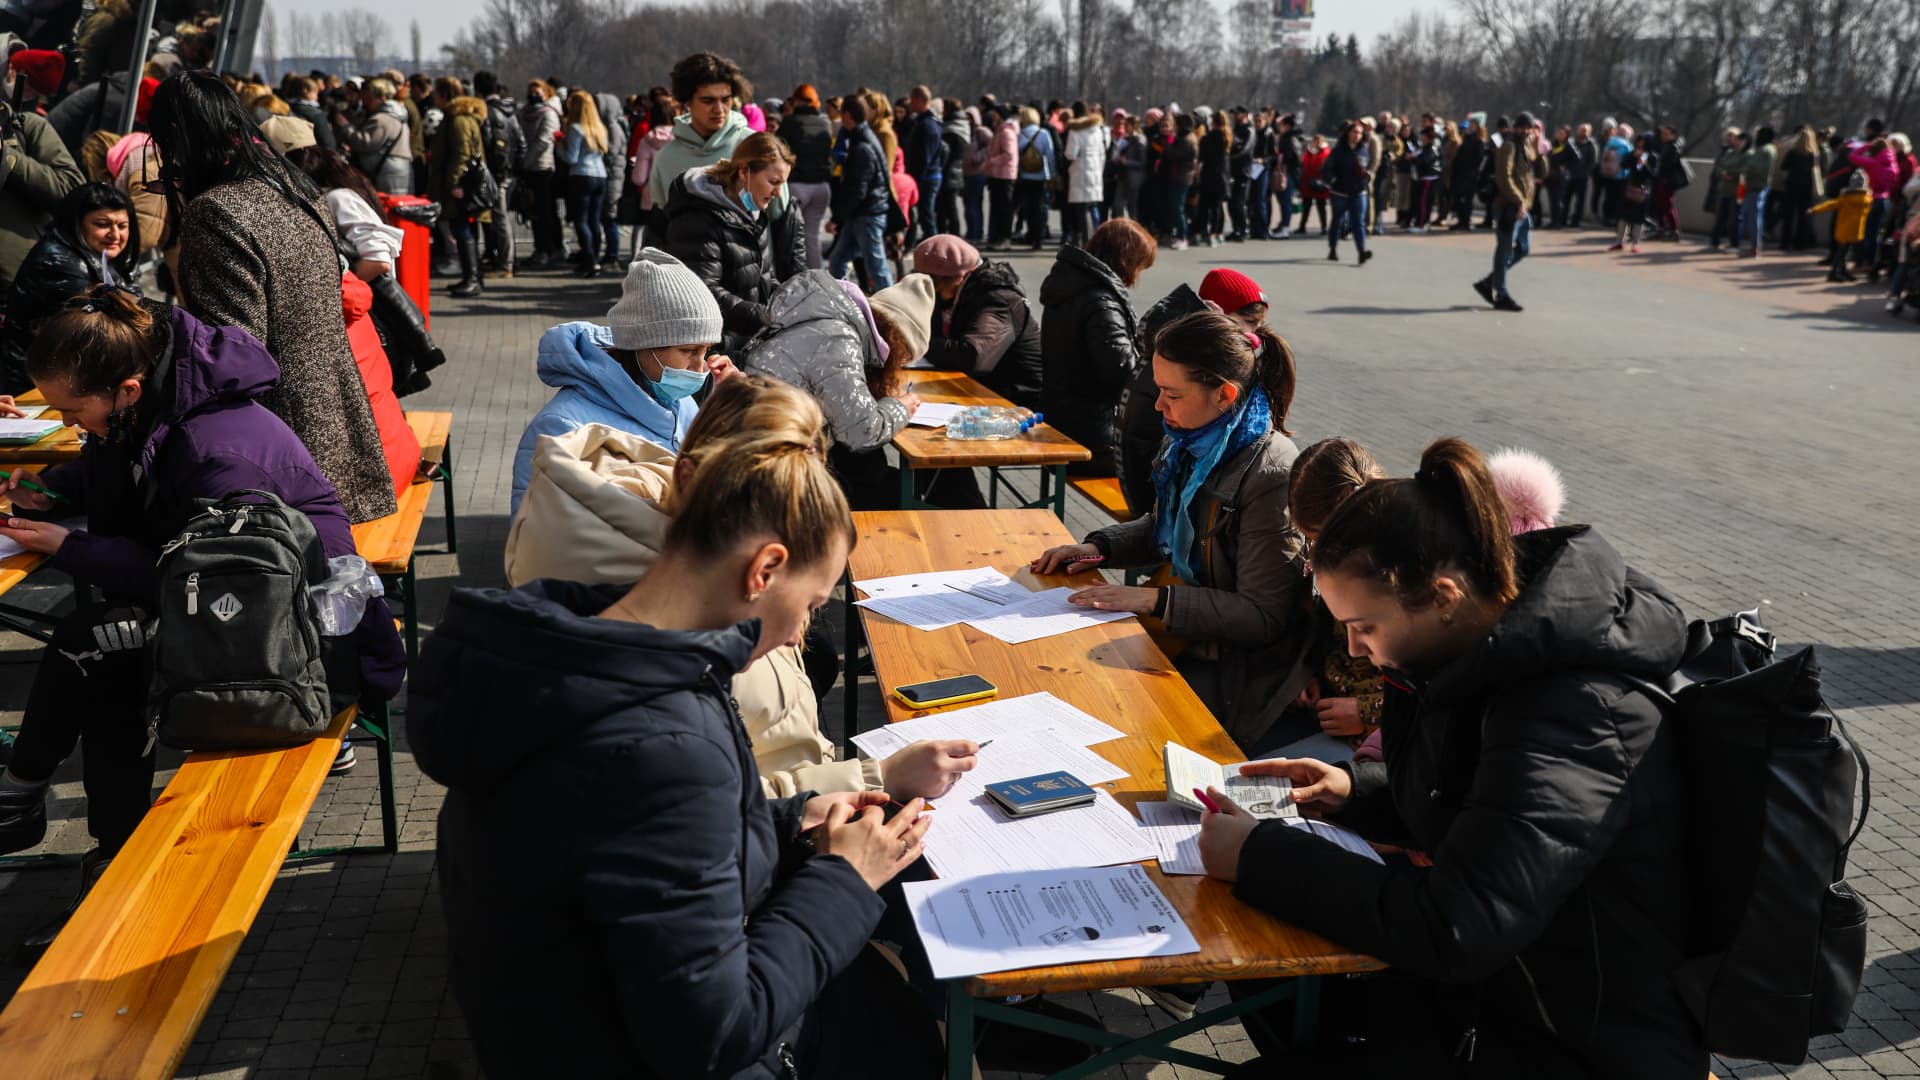 Refugees from Ukraine who fled to Poland after Russian attack are filling in documents in front of a register point at Tauron Arena where they can obtain a PESEL national identification number and remain in the country. Krakow, Poland on March 16, 2022.